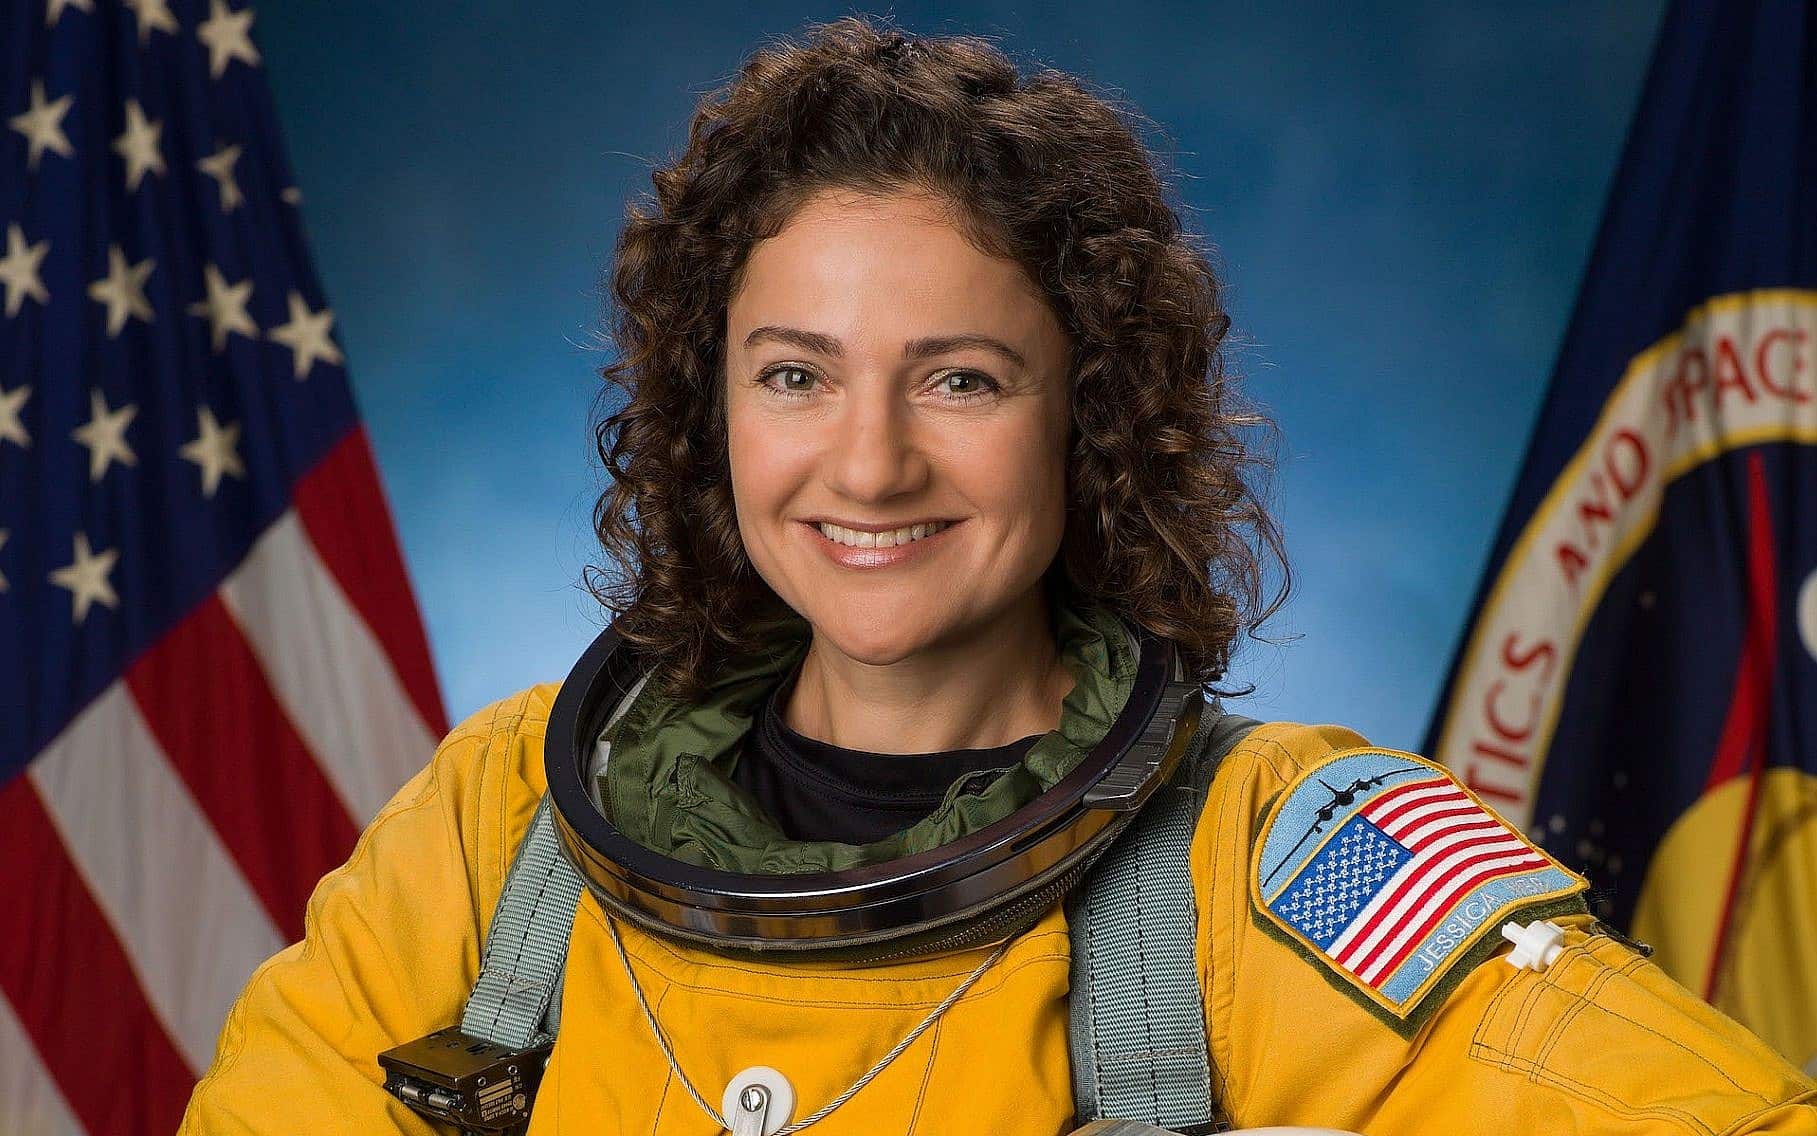 Jessica Meir, astronaut: Diversity, yes. But only by working as hard.